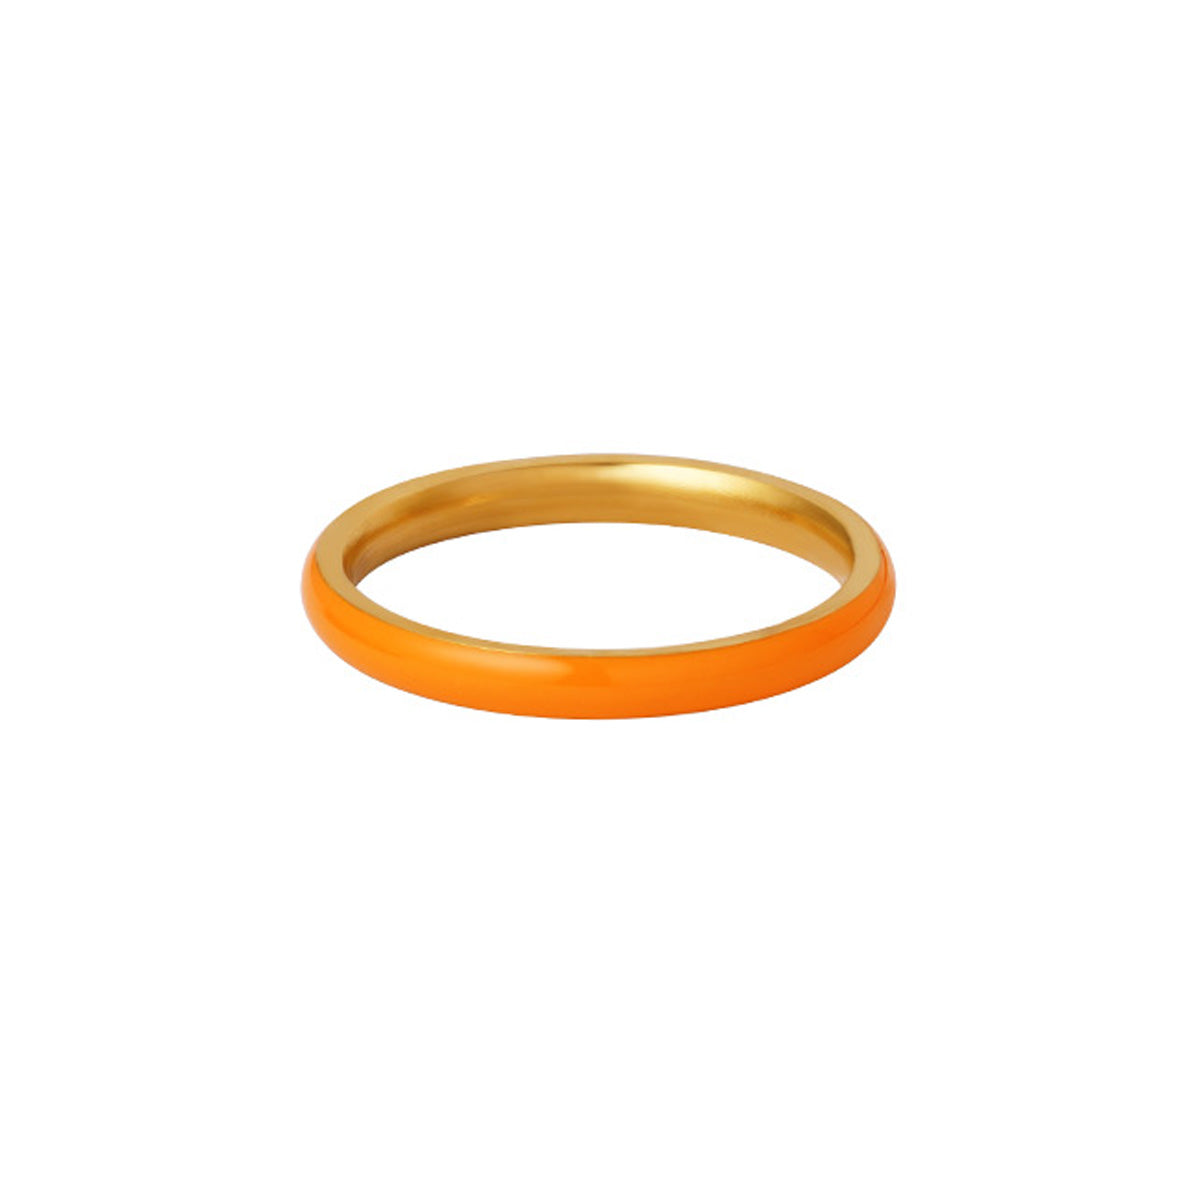 gold rings for men with price in tanishq